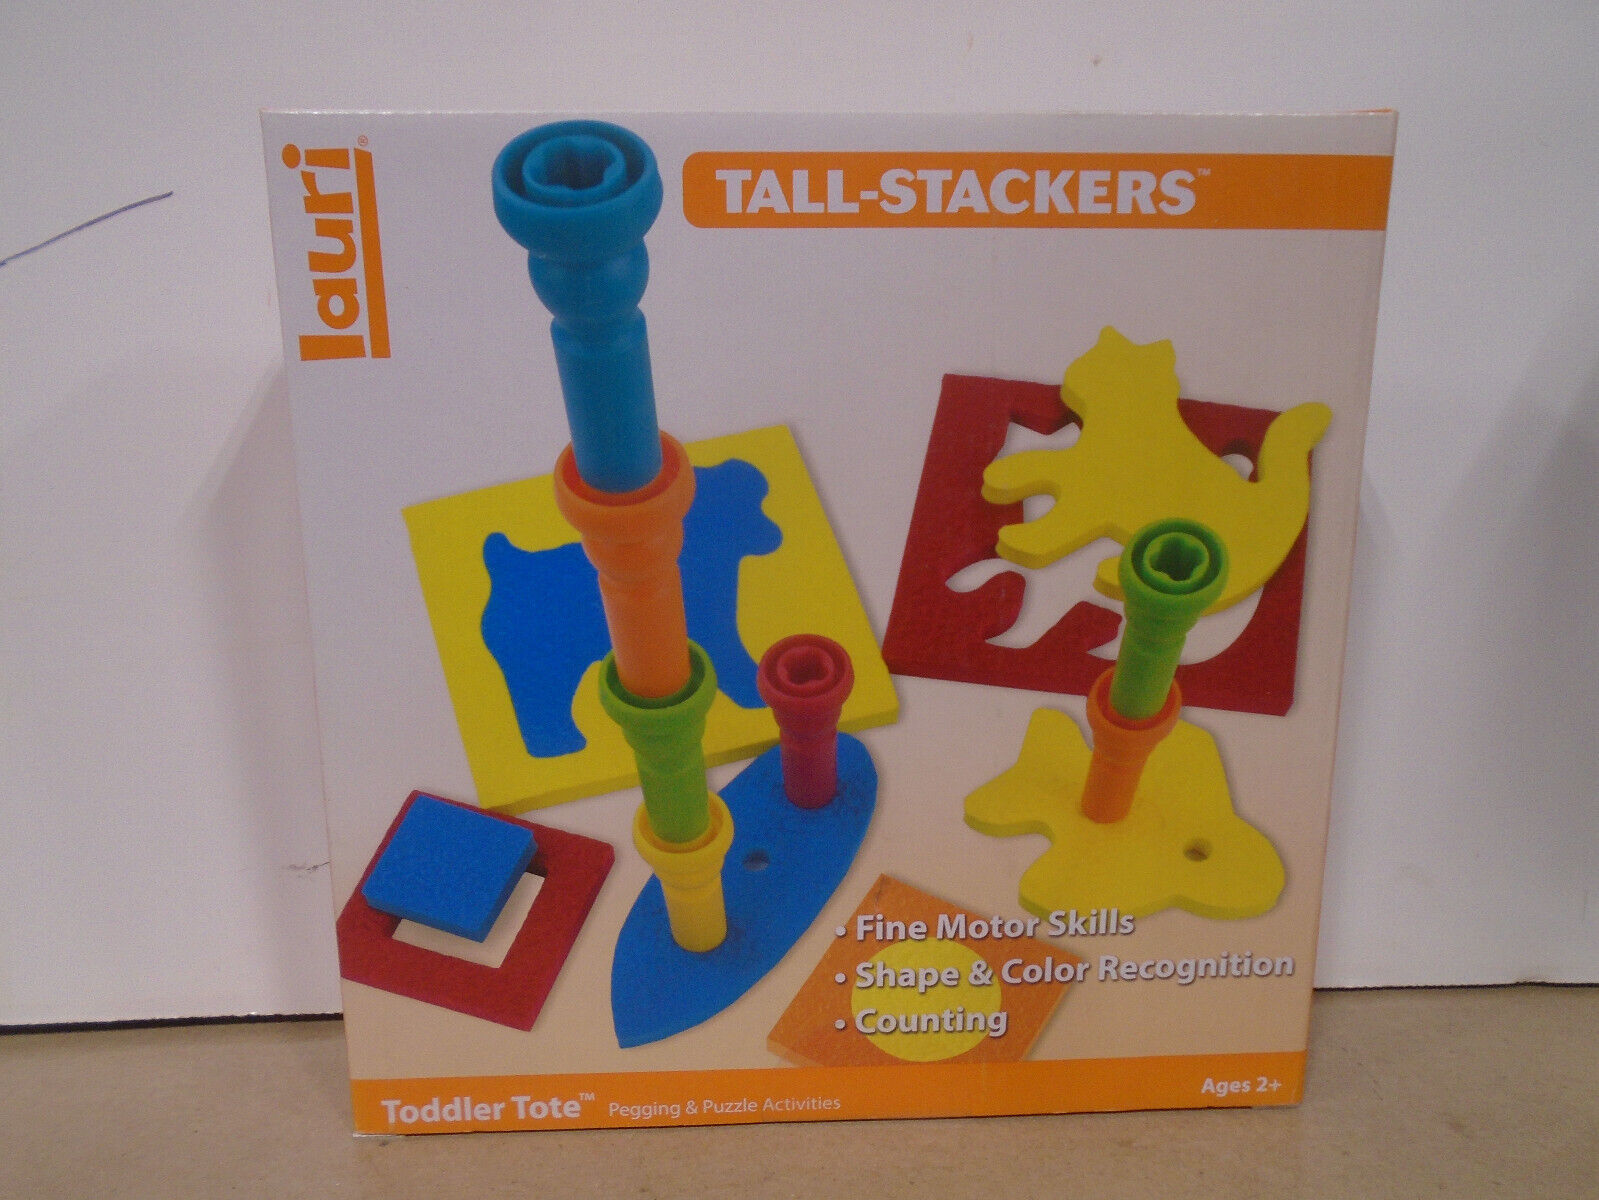 LAURI #2116 TALL-STACKERS TODDLER TOTE EDUCATIONAL PLAY FOR 2+ YRS NEW IN BOX